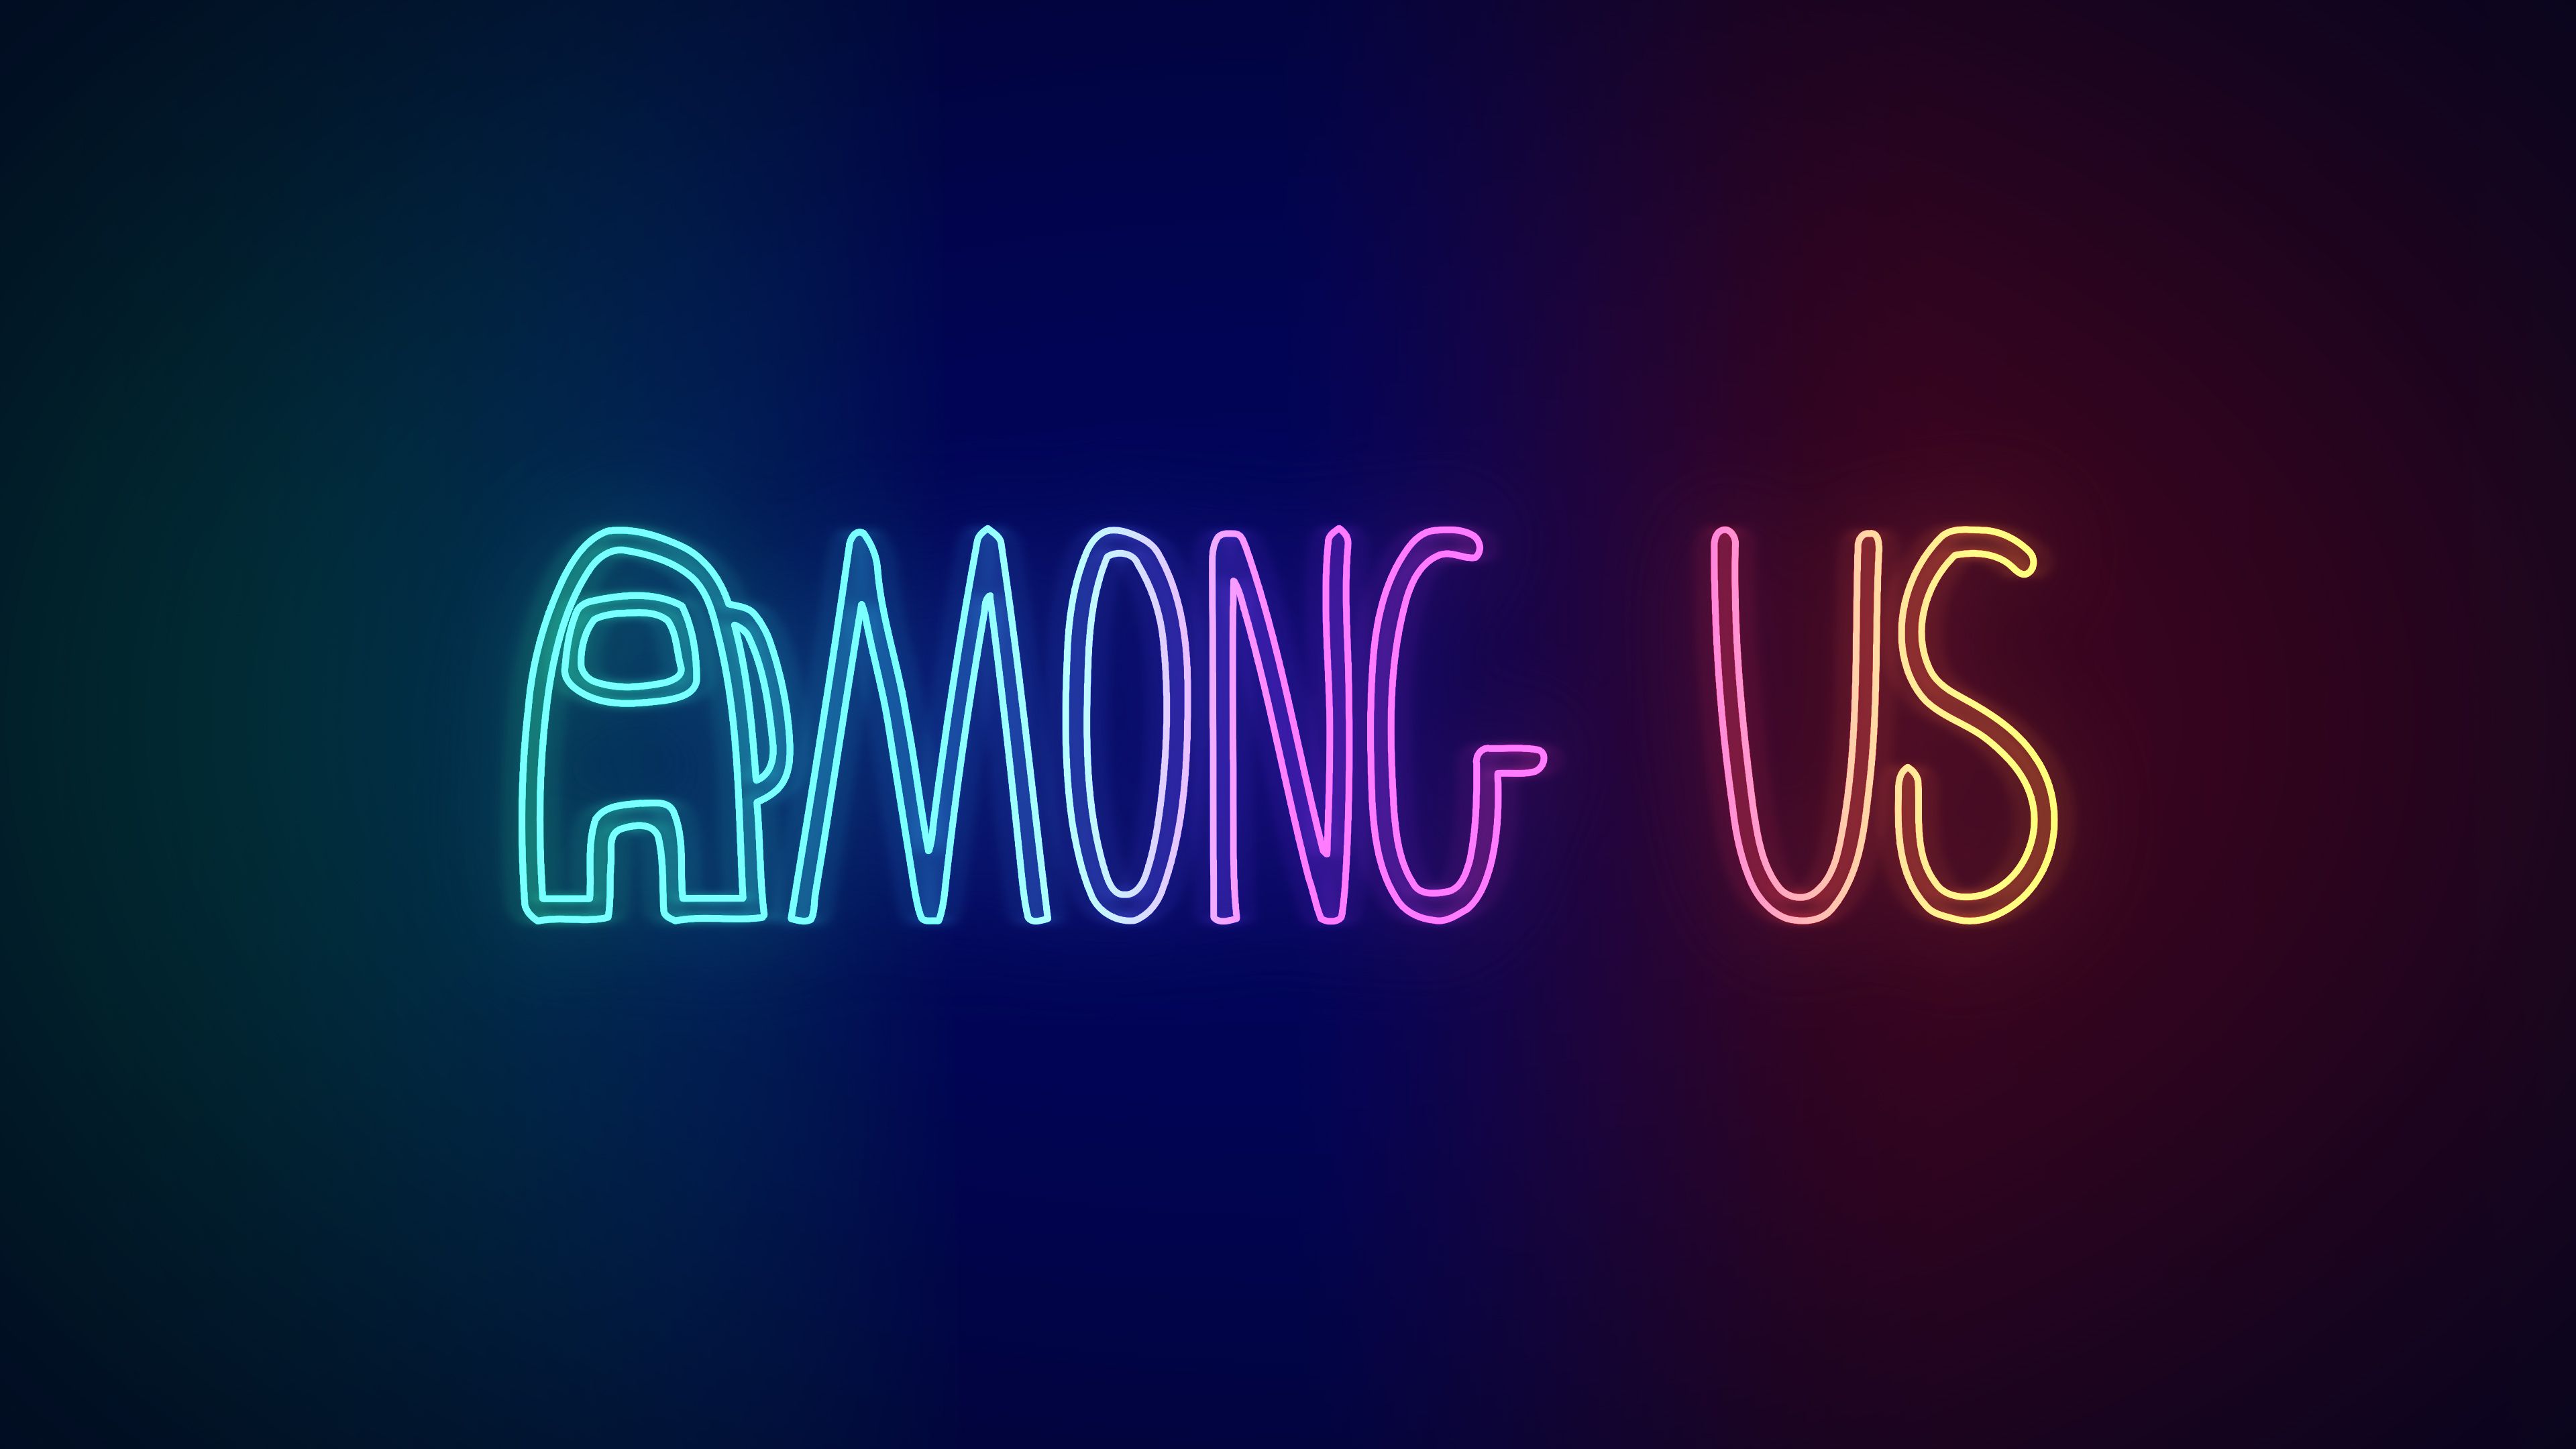 Among Us Wallpaper 4K, Neon, iOS Games, Android games, PC Games, Games